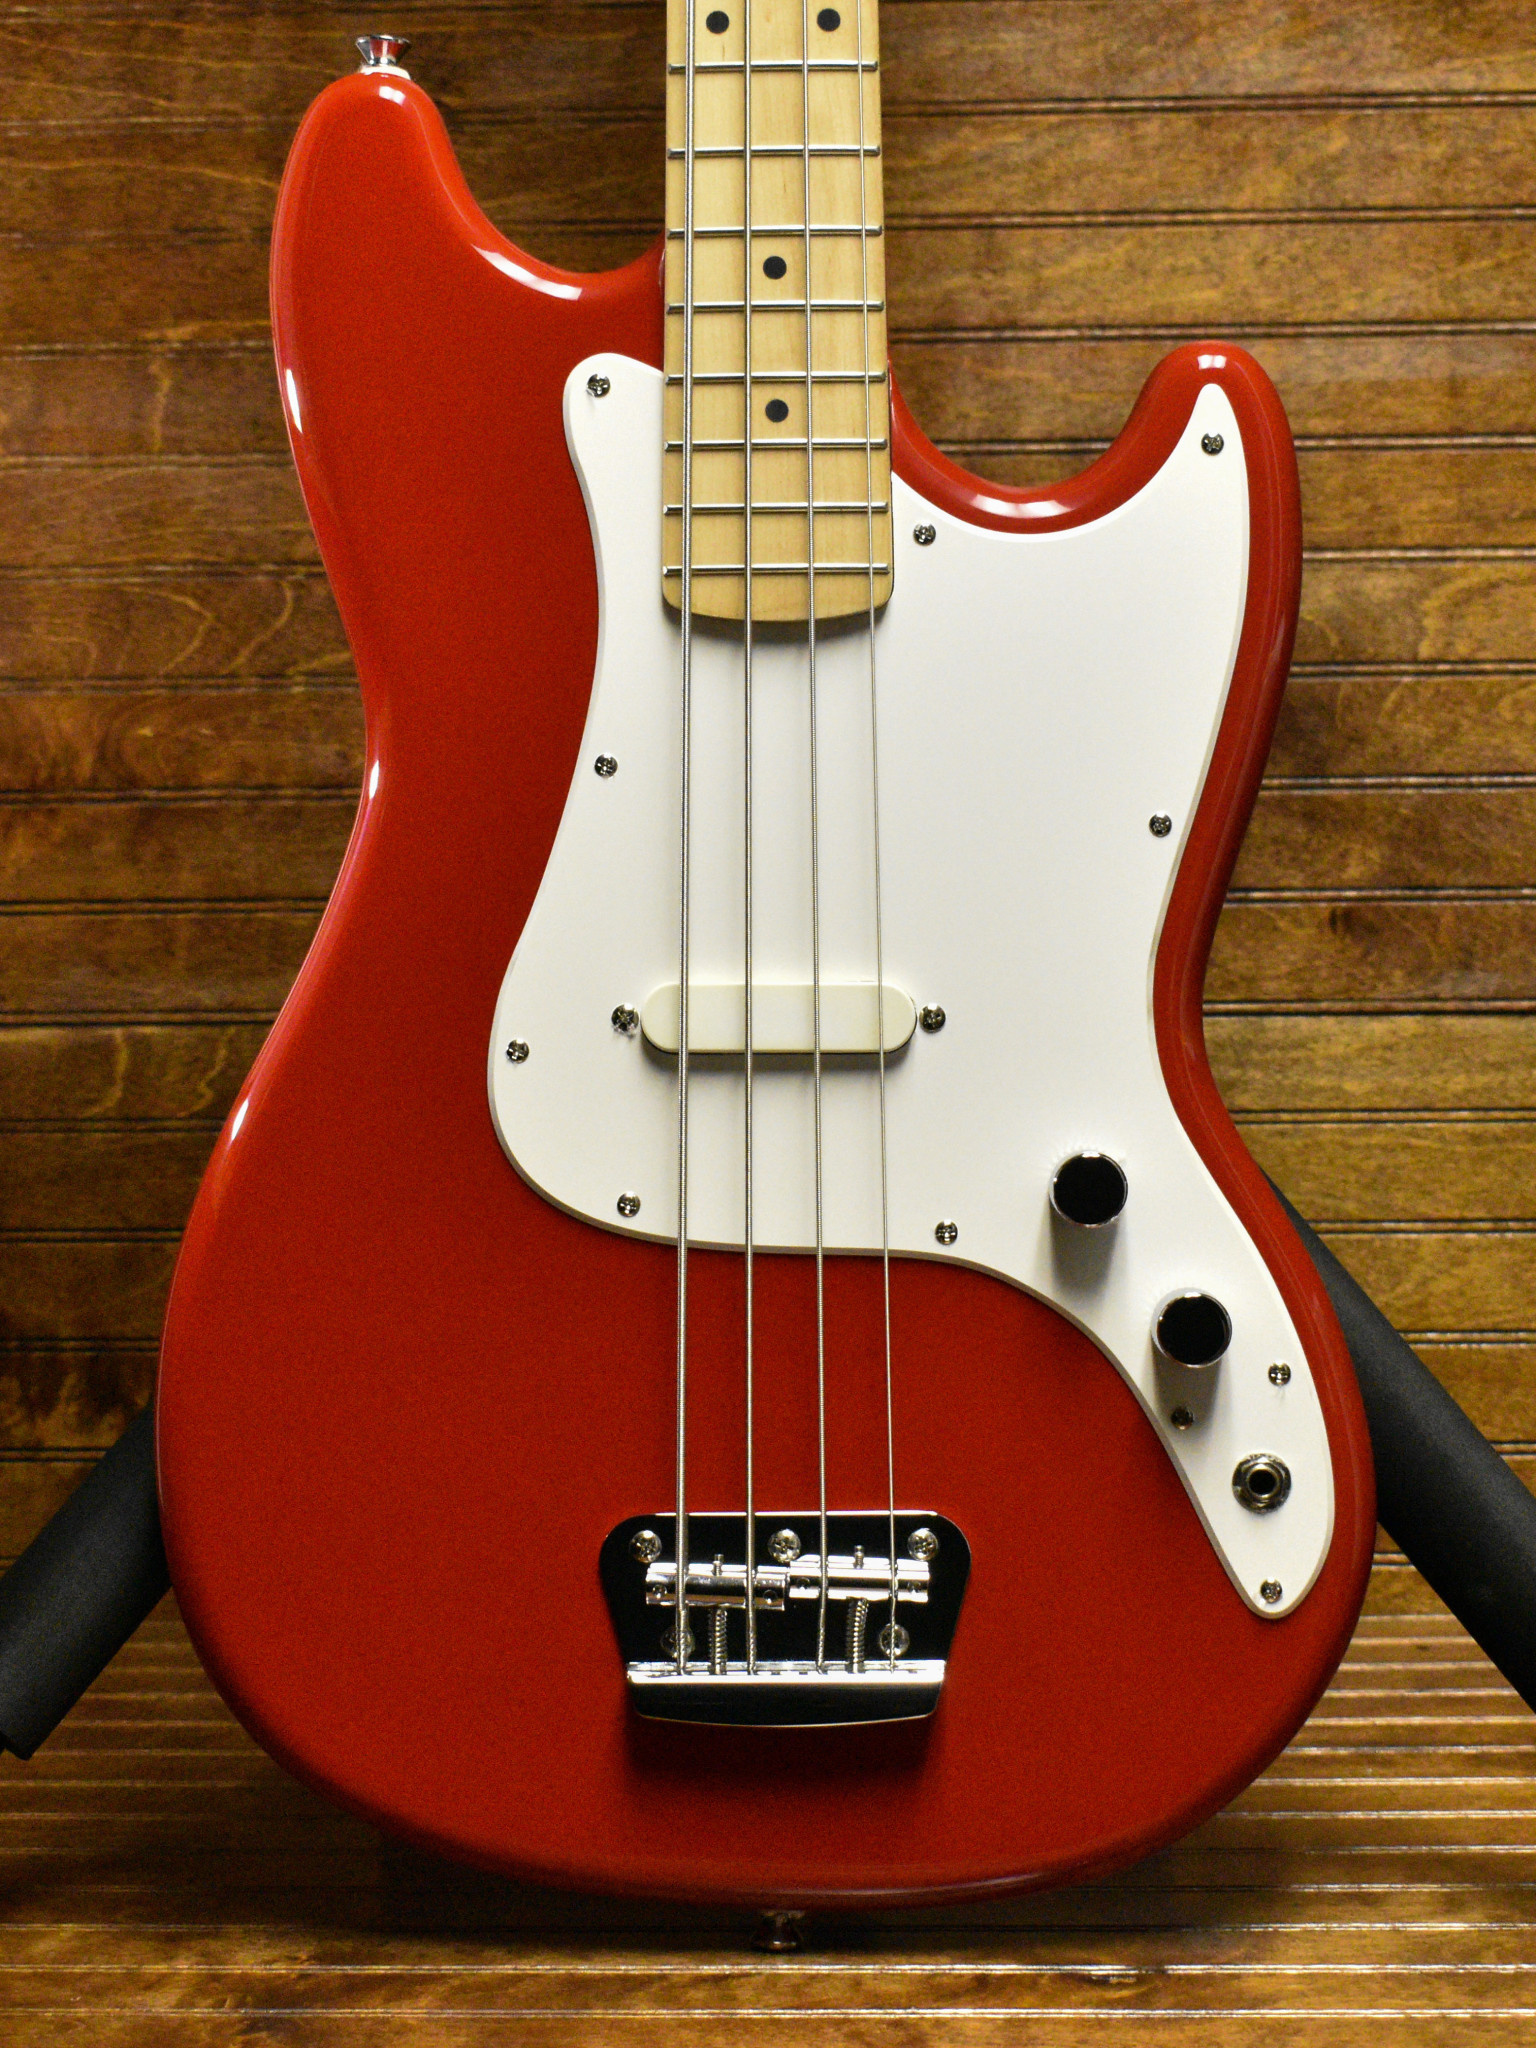 Squier Squier Affinity Bronco Bass Torino Red